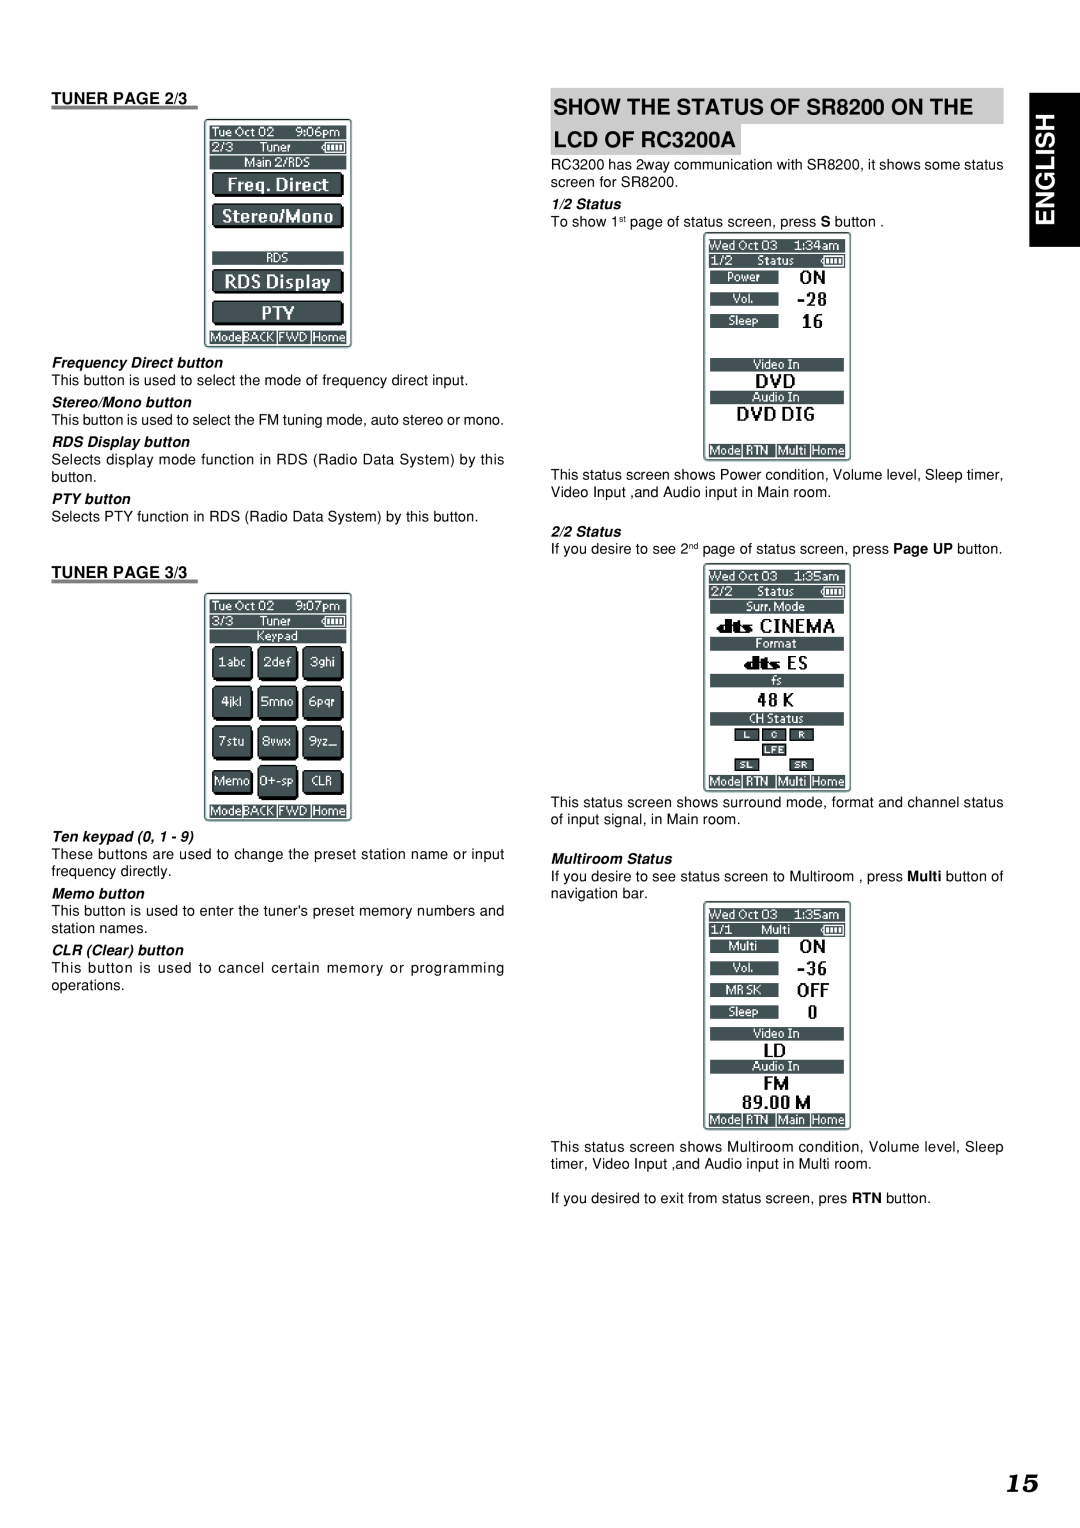 Marantz SR8200 English, TUNER PAGE 2/3, TUNER PAGE 3/3, Frequency Direct button, Stereo/Mono button, RDS Display button 